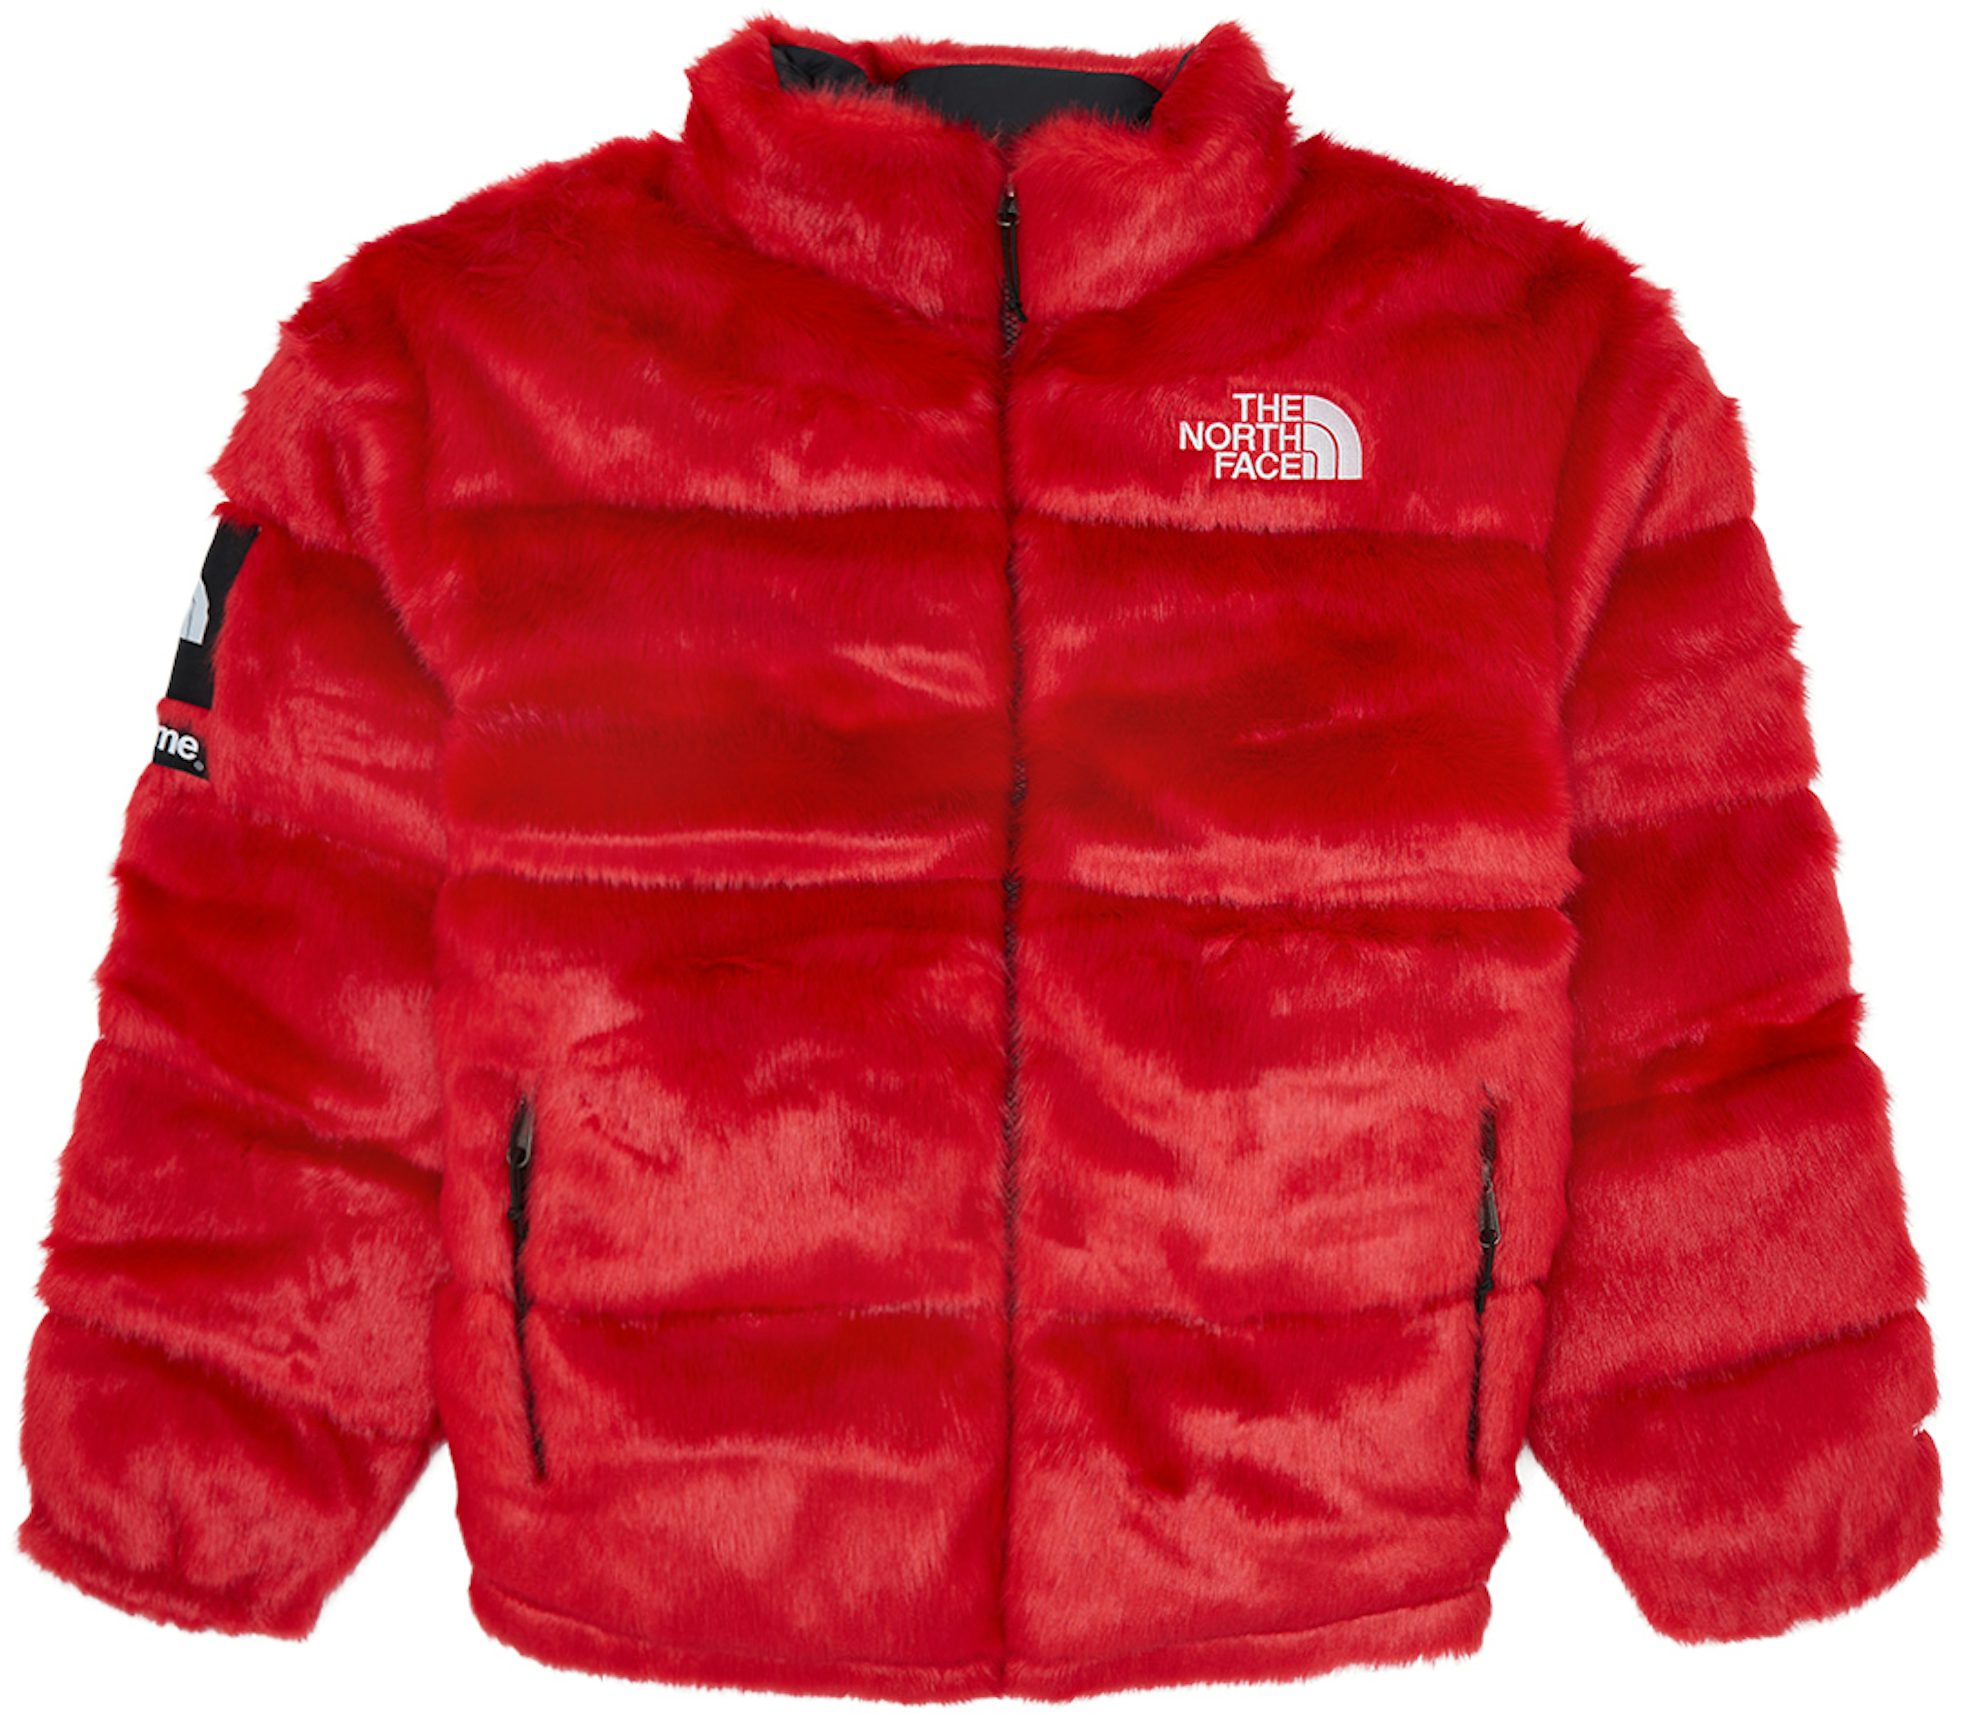 Supreme x The North Face 2015 Fall/Winter Collection